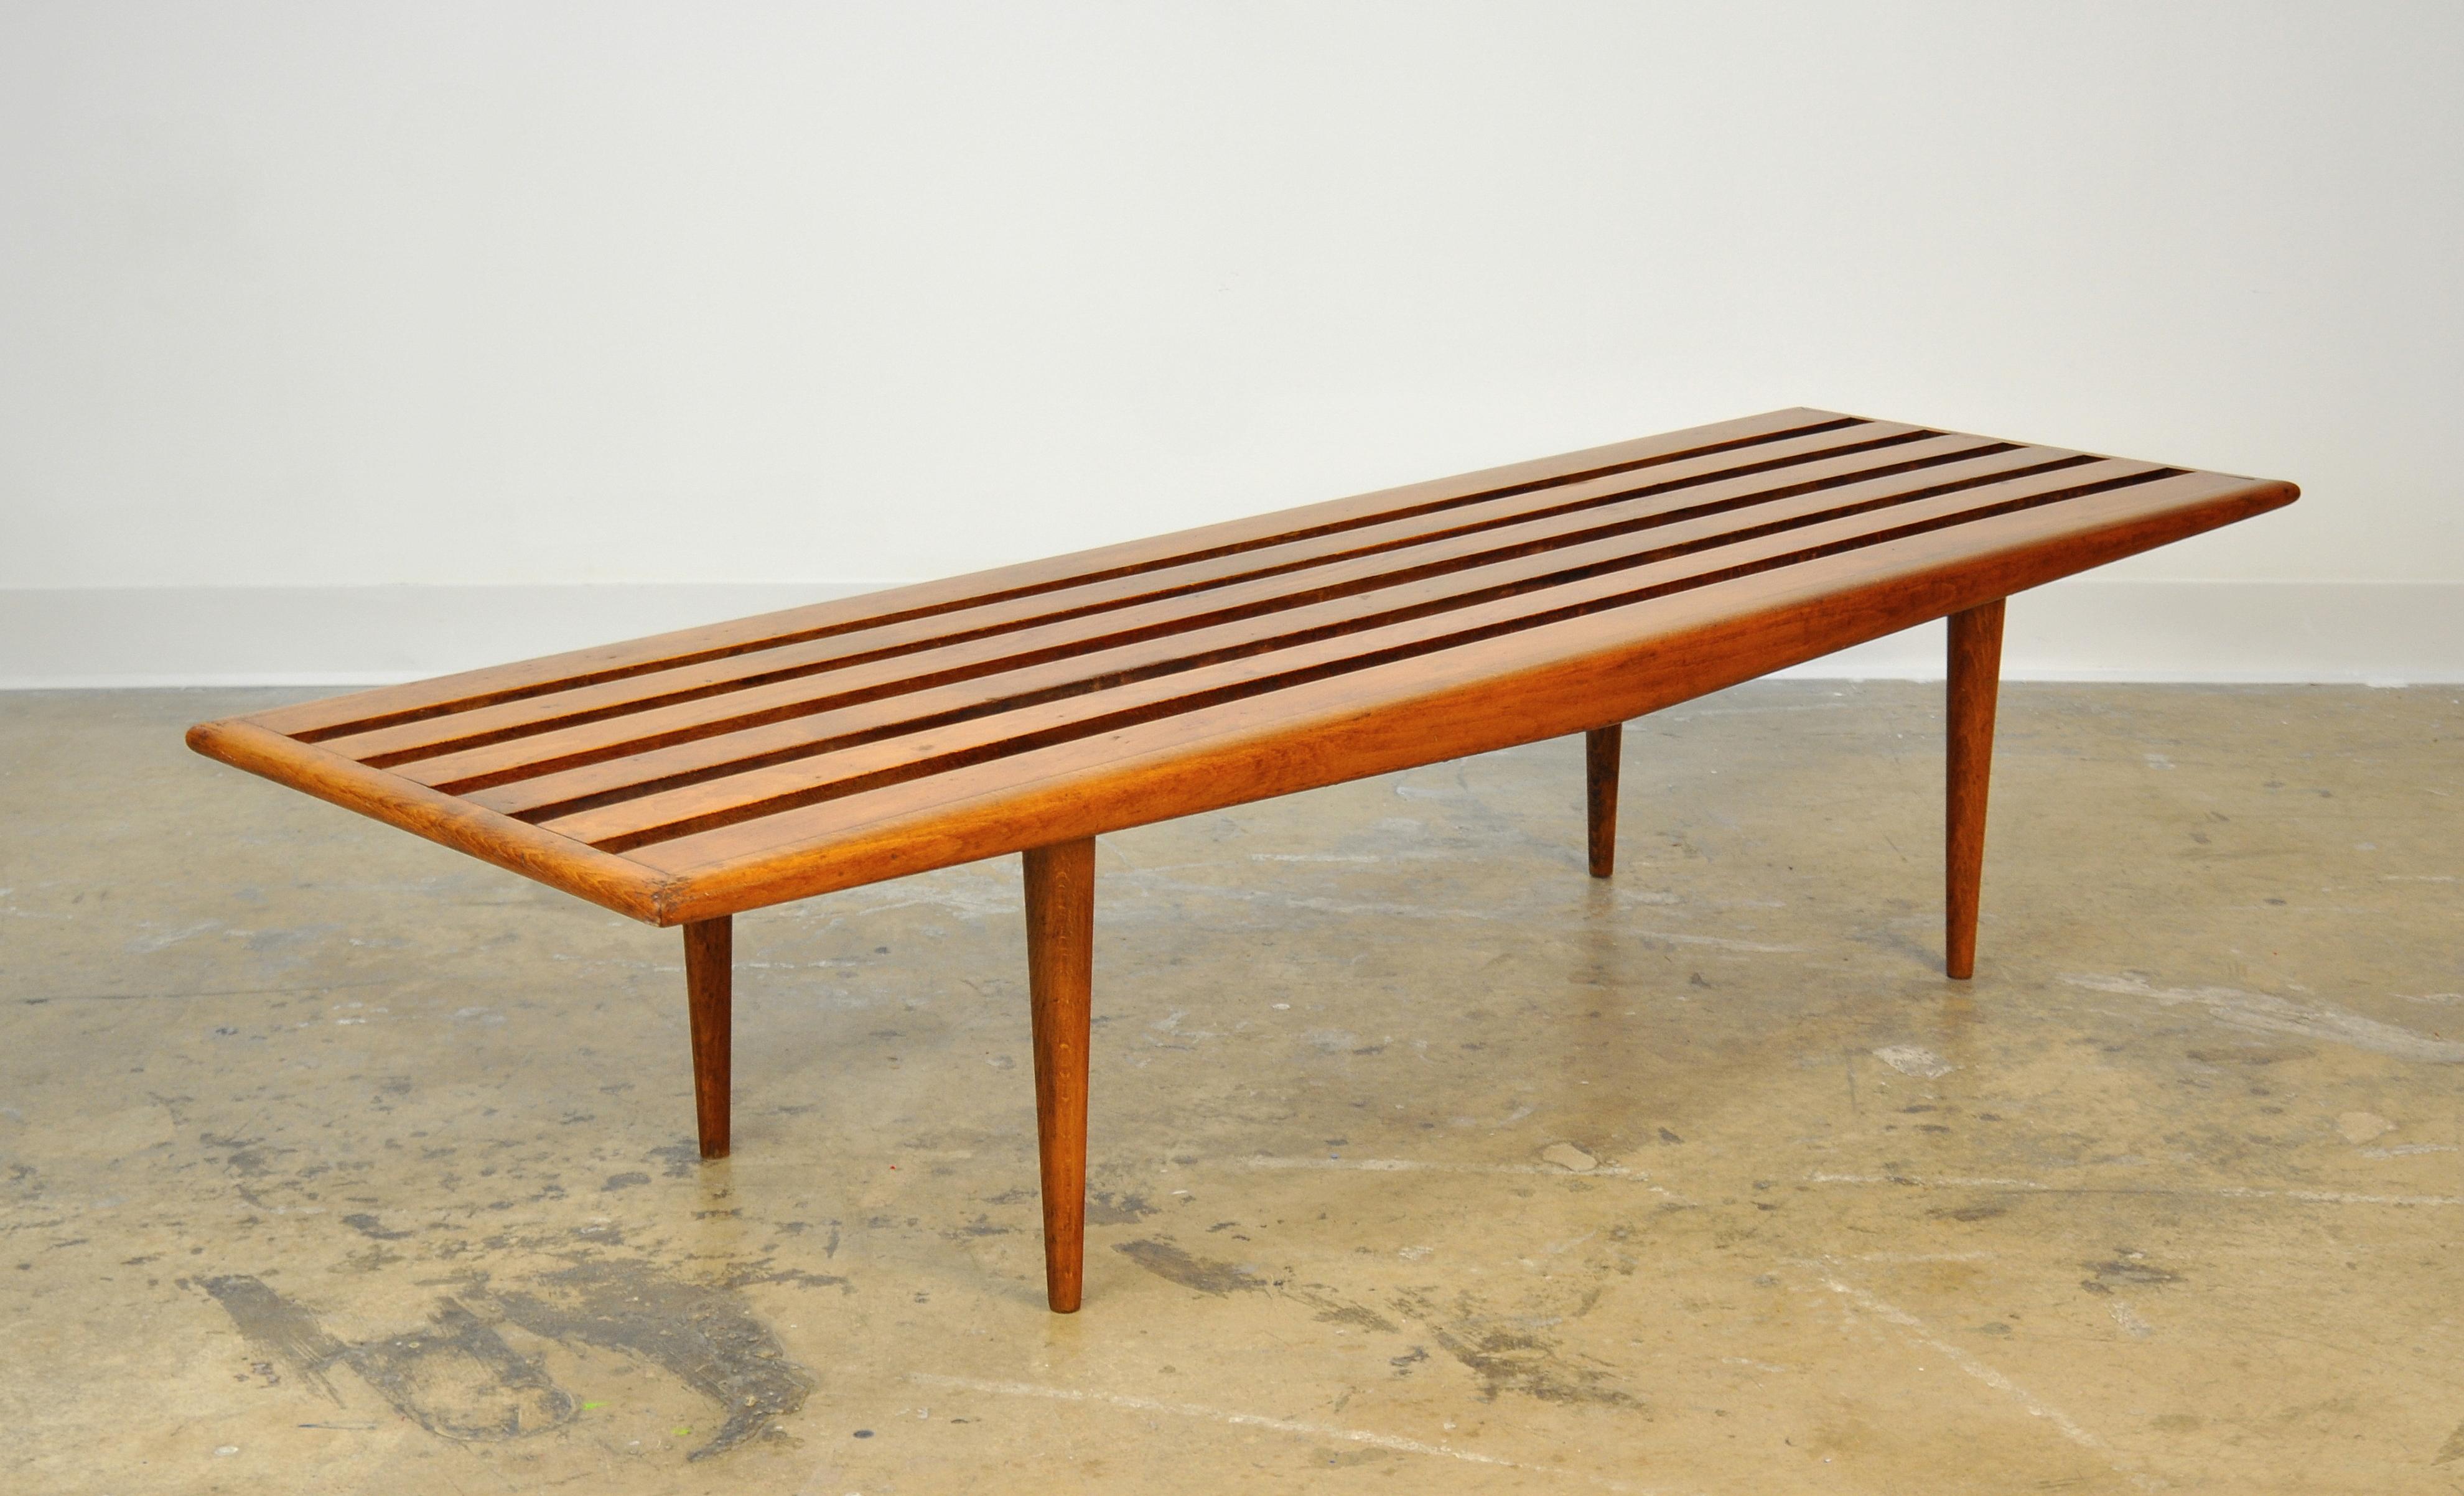 A midcentury long, slatted wood coffee table, dating from the 1960s. The vintage bench features long and slender tapered legs. It can be used virtually anywhere: As a cocktail or sofa table, at the foot of a bed, under a window, in an entrance